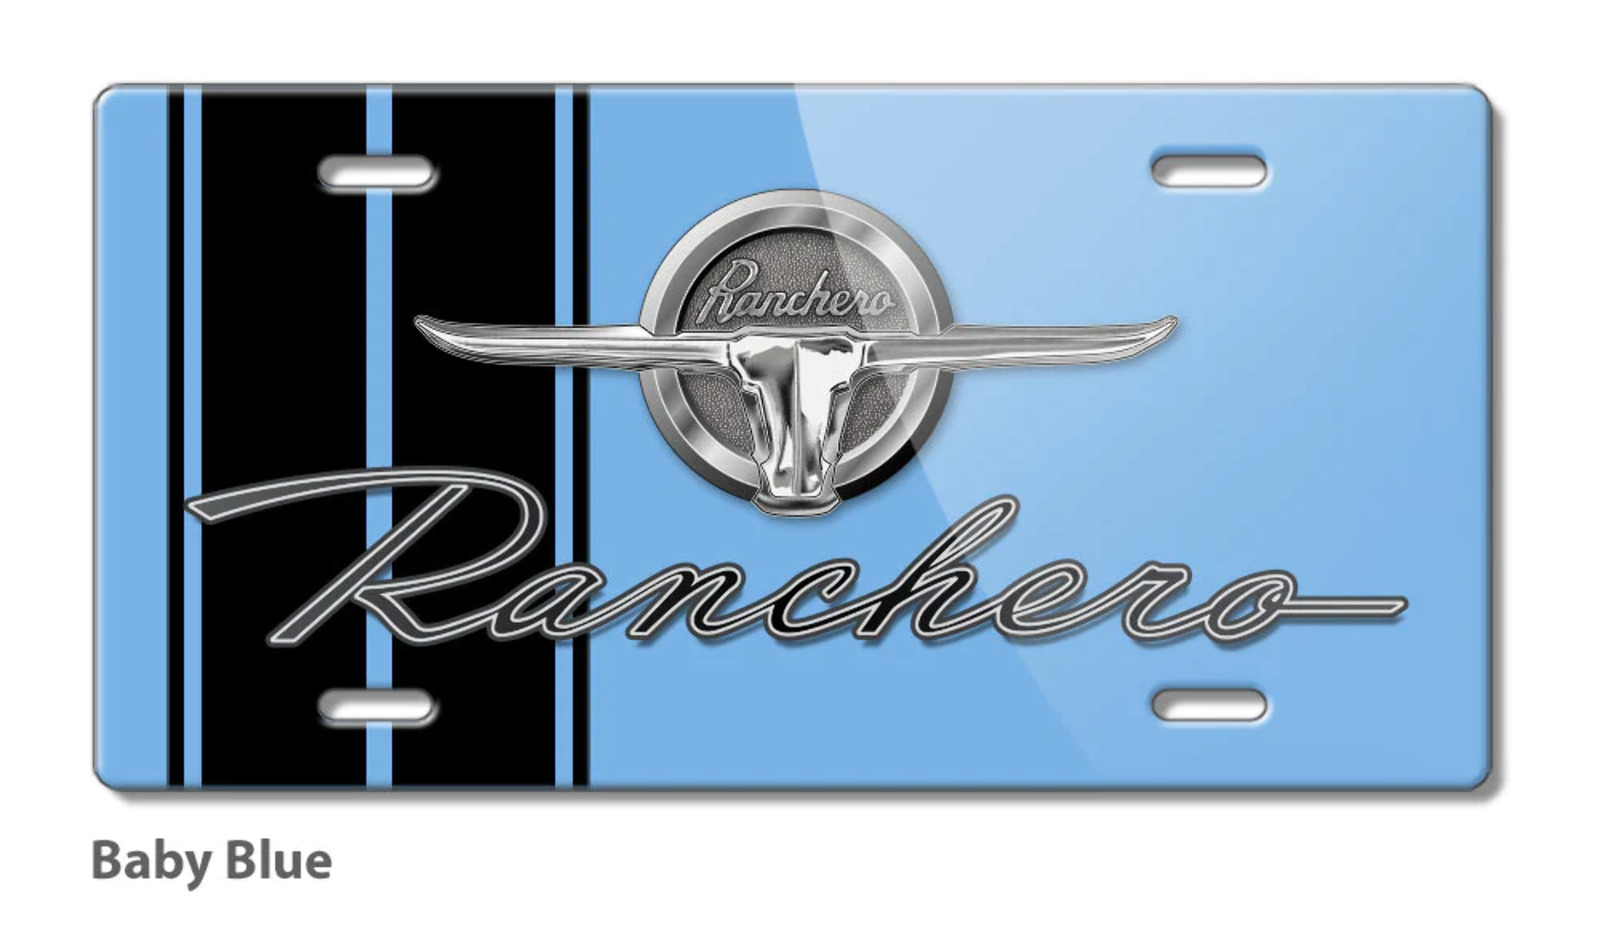 1964 - 1965 Ford Ranchero Emblem Novelty License Plate - 16 colors - Made in USA